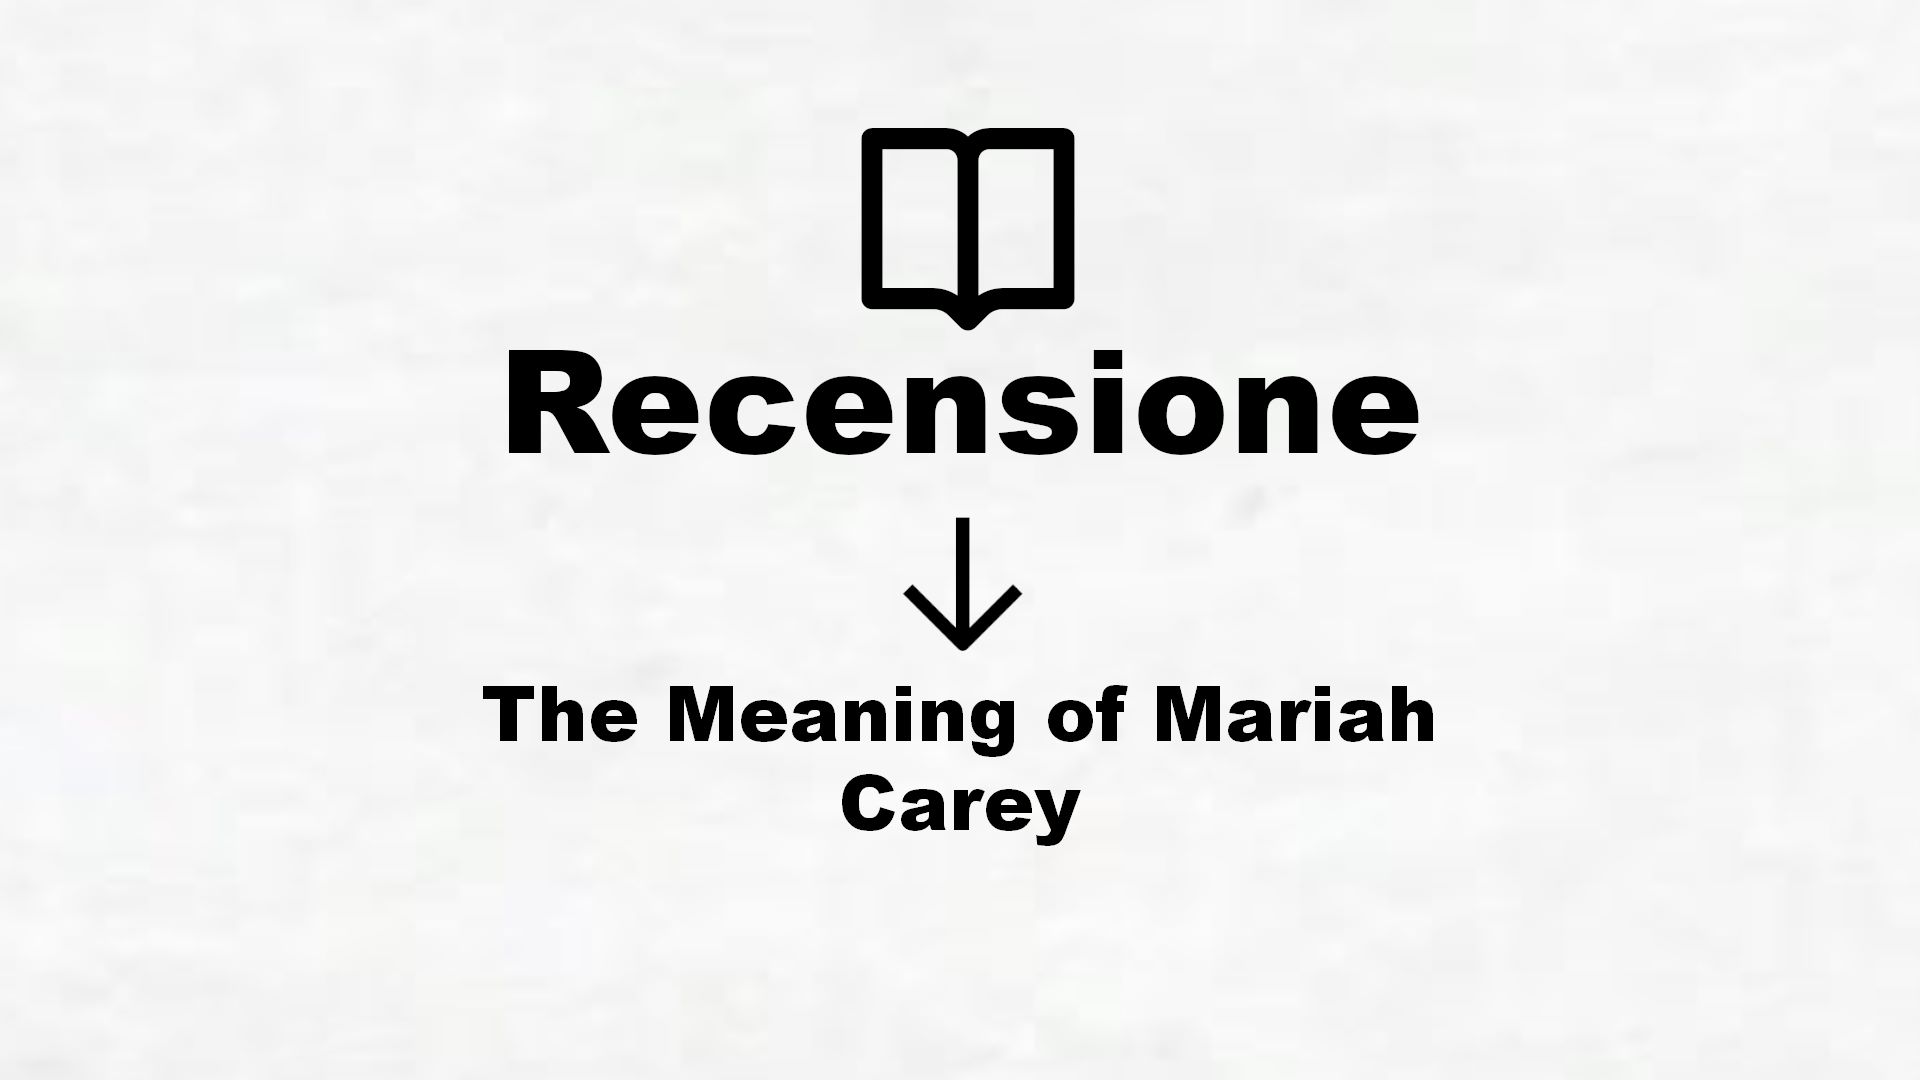 The Meaning of Mariah Carey – Recensione Libro